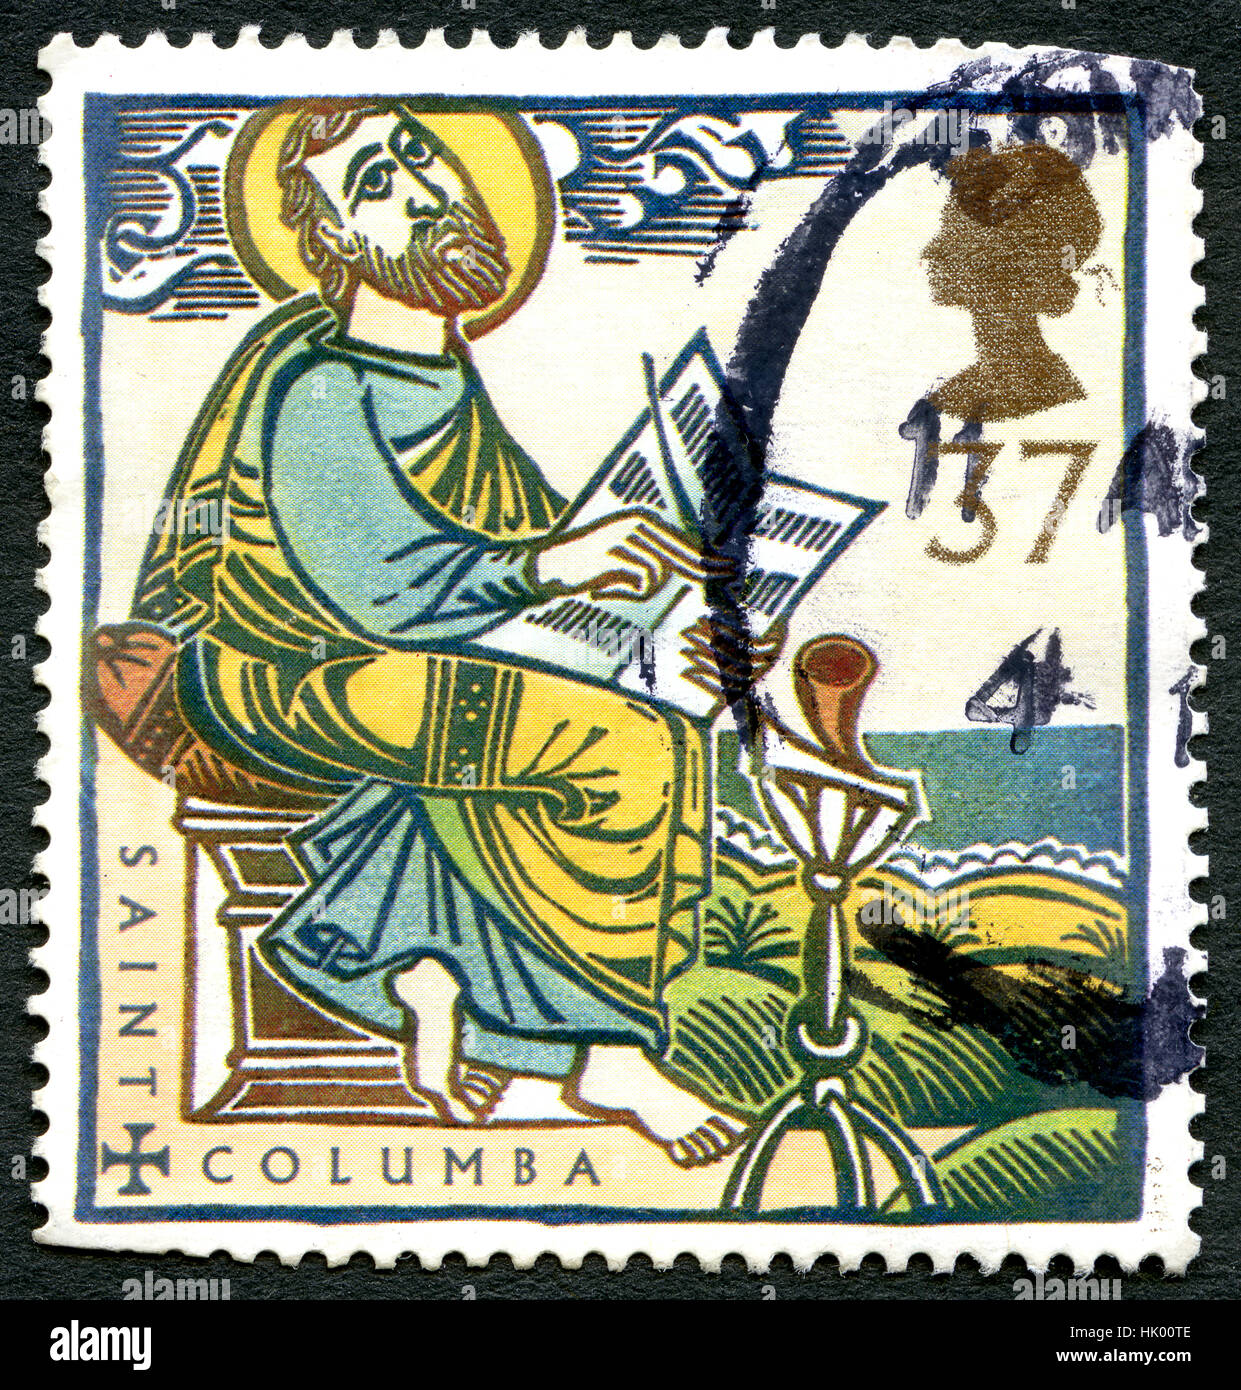 GREAT BRITAIN - CIRCA 1997: A used postage stamp from the UK, celebrating the life of Saint Columba - an Irish Abbot and Missionary credited with spre Stock Photo